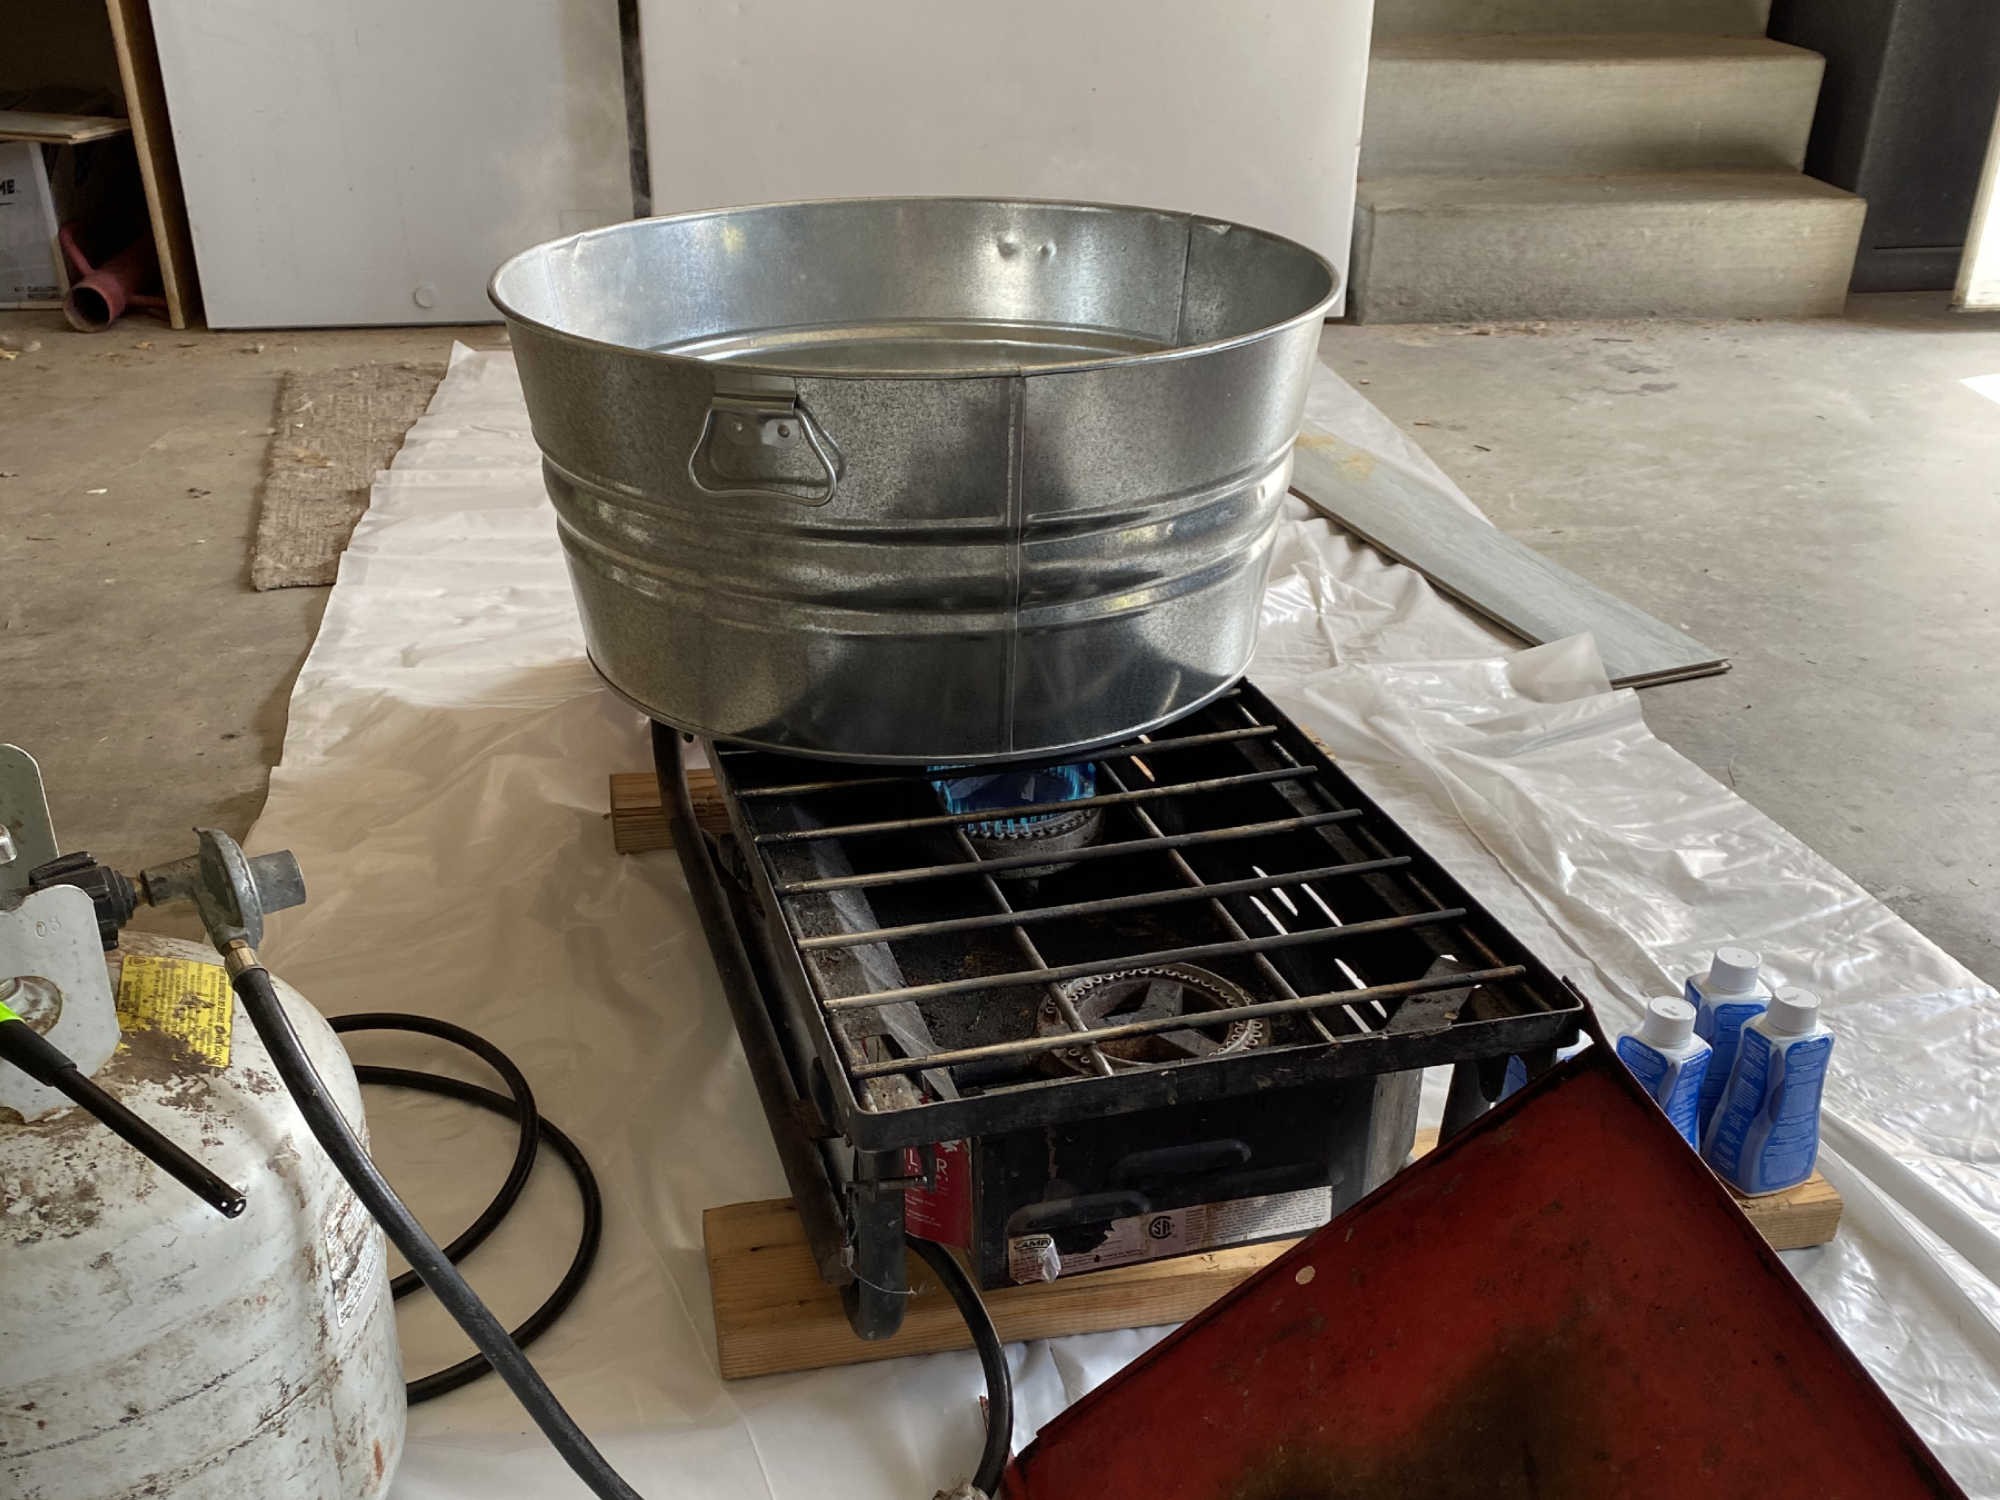 A metal tub full of boiling water, being heated by a propane camp stove in a garage. The floor is covered in a tarp and a cooking thermometer has been inserted in the water to ensure the right temperature.